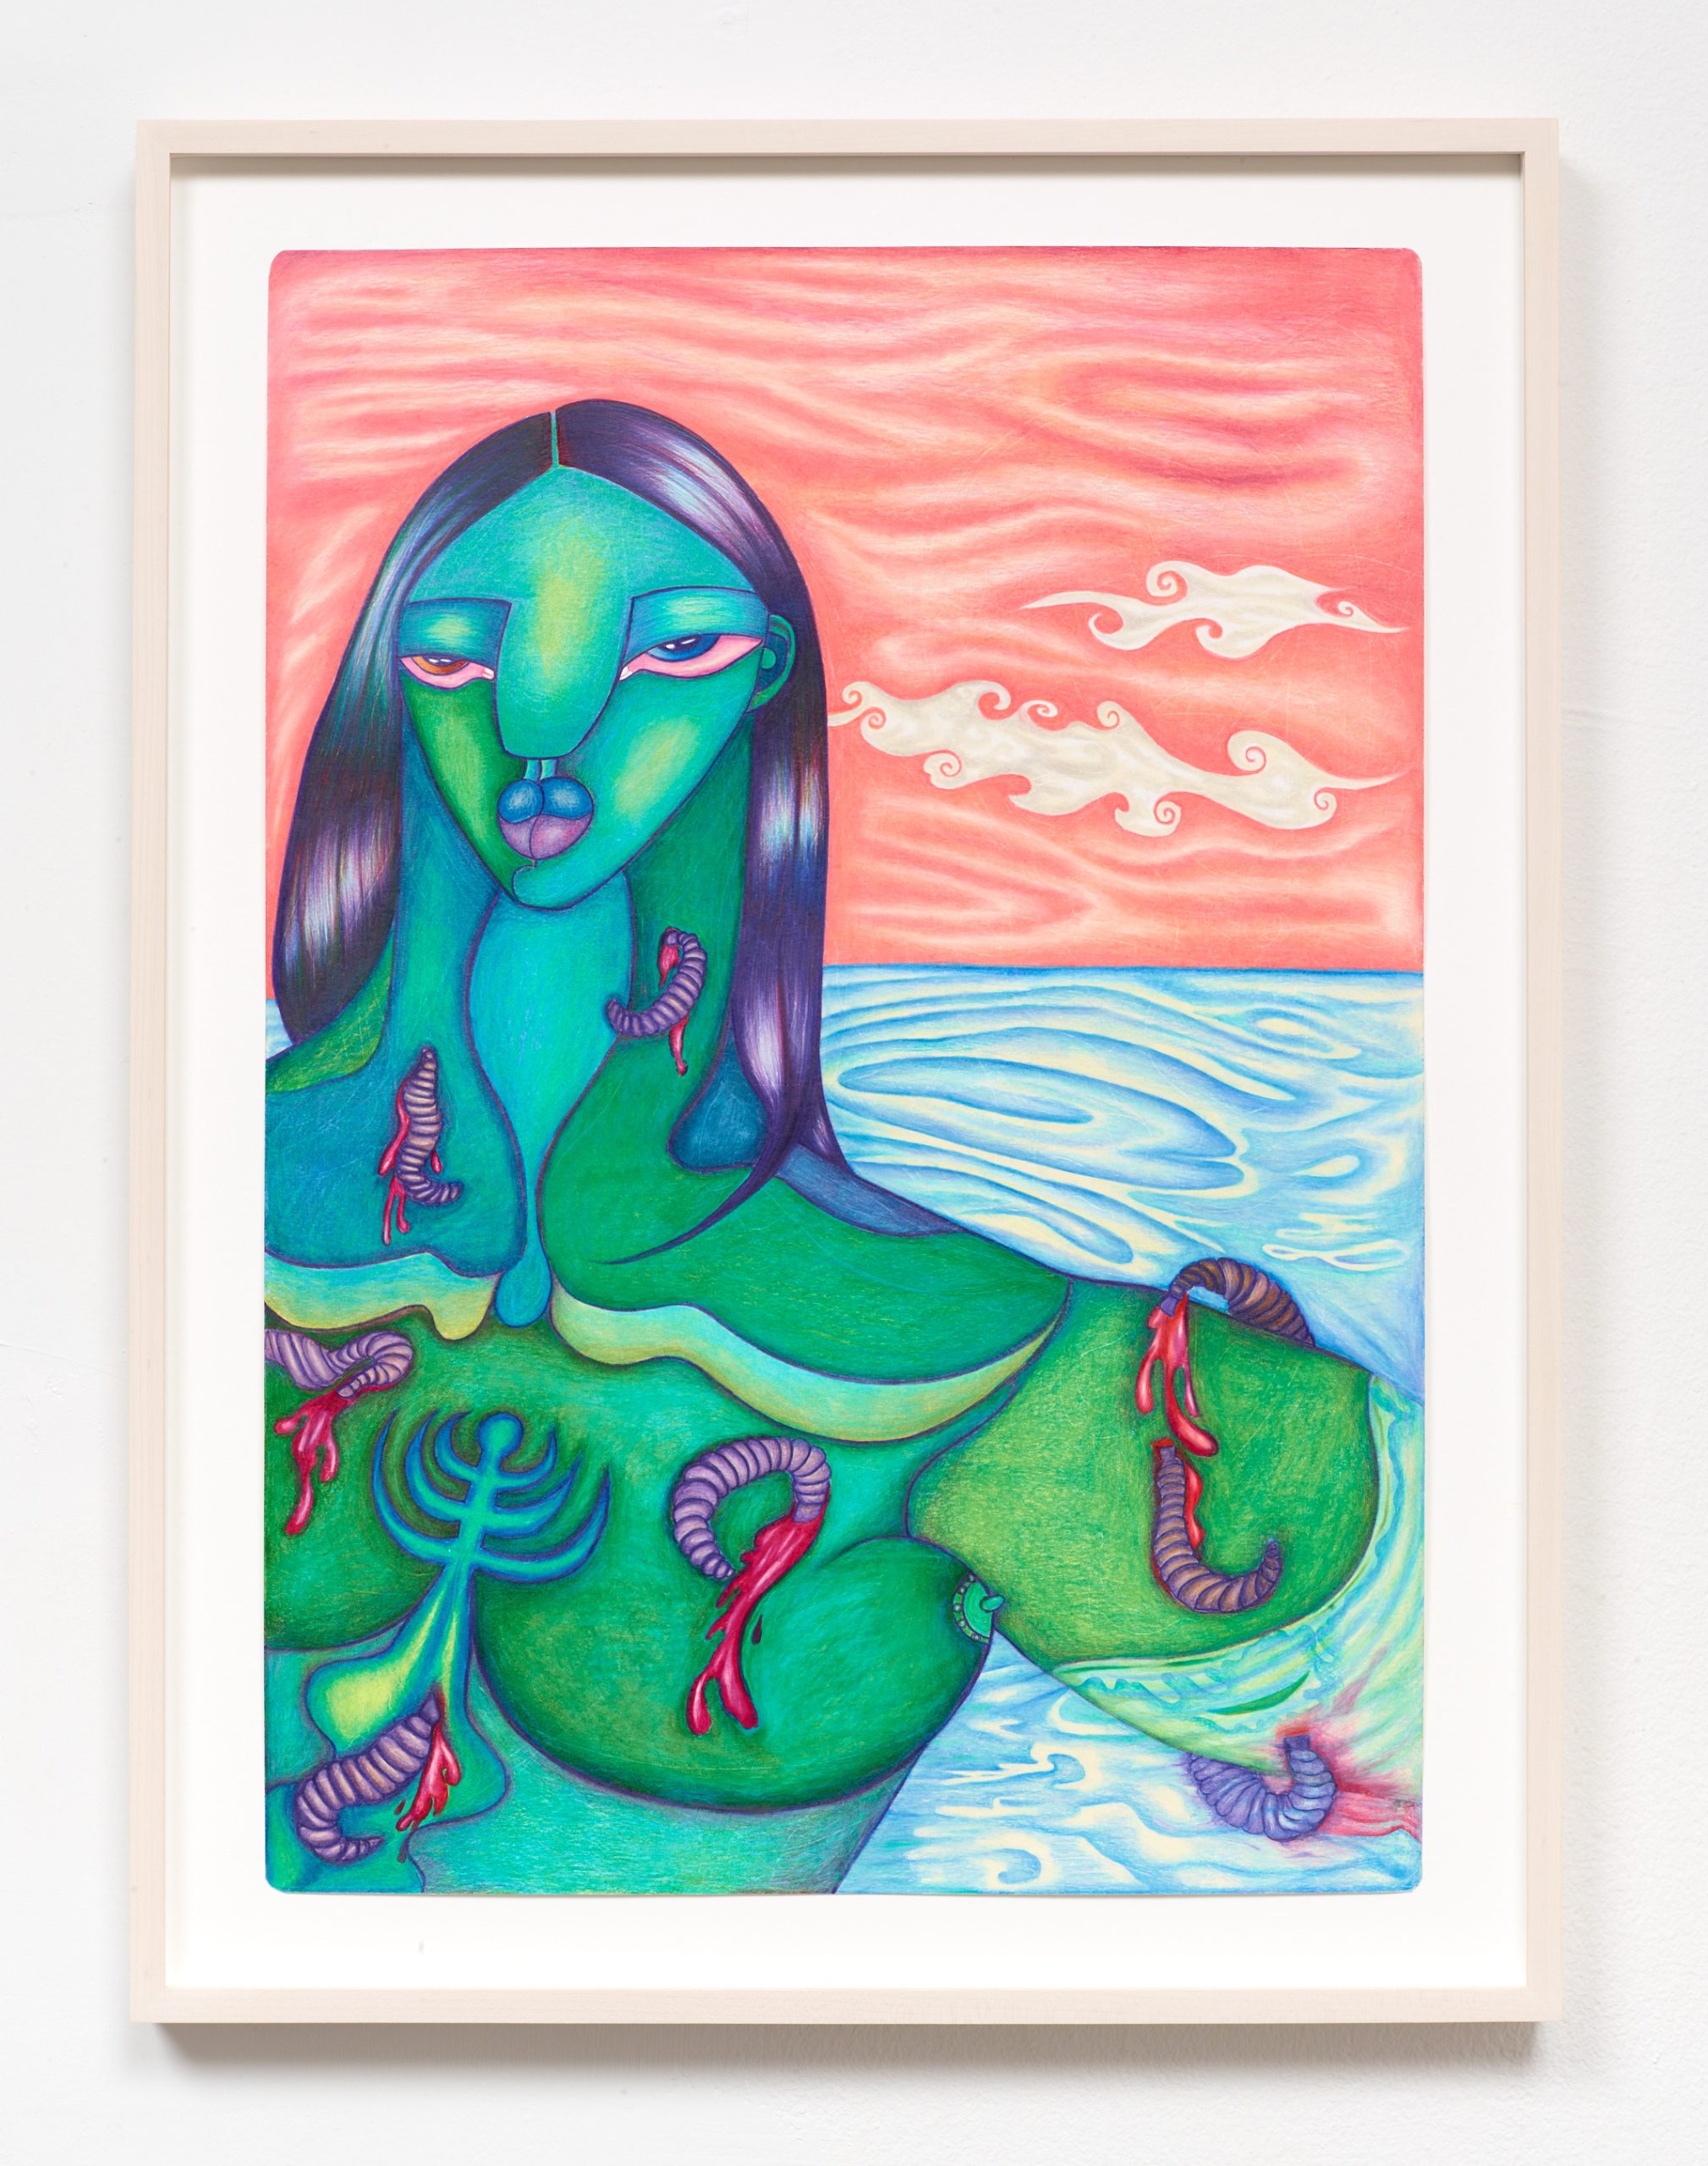 Walking through dreams, nightmares, and memories (Part 1), 2021, Colored oil pencil on paper, 27 x 20 in (Framed)
Courtesy the artist and Kapp Kapp